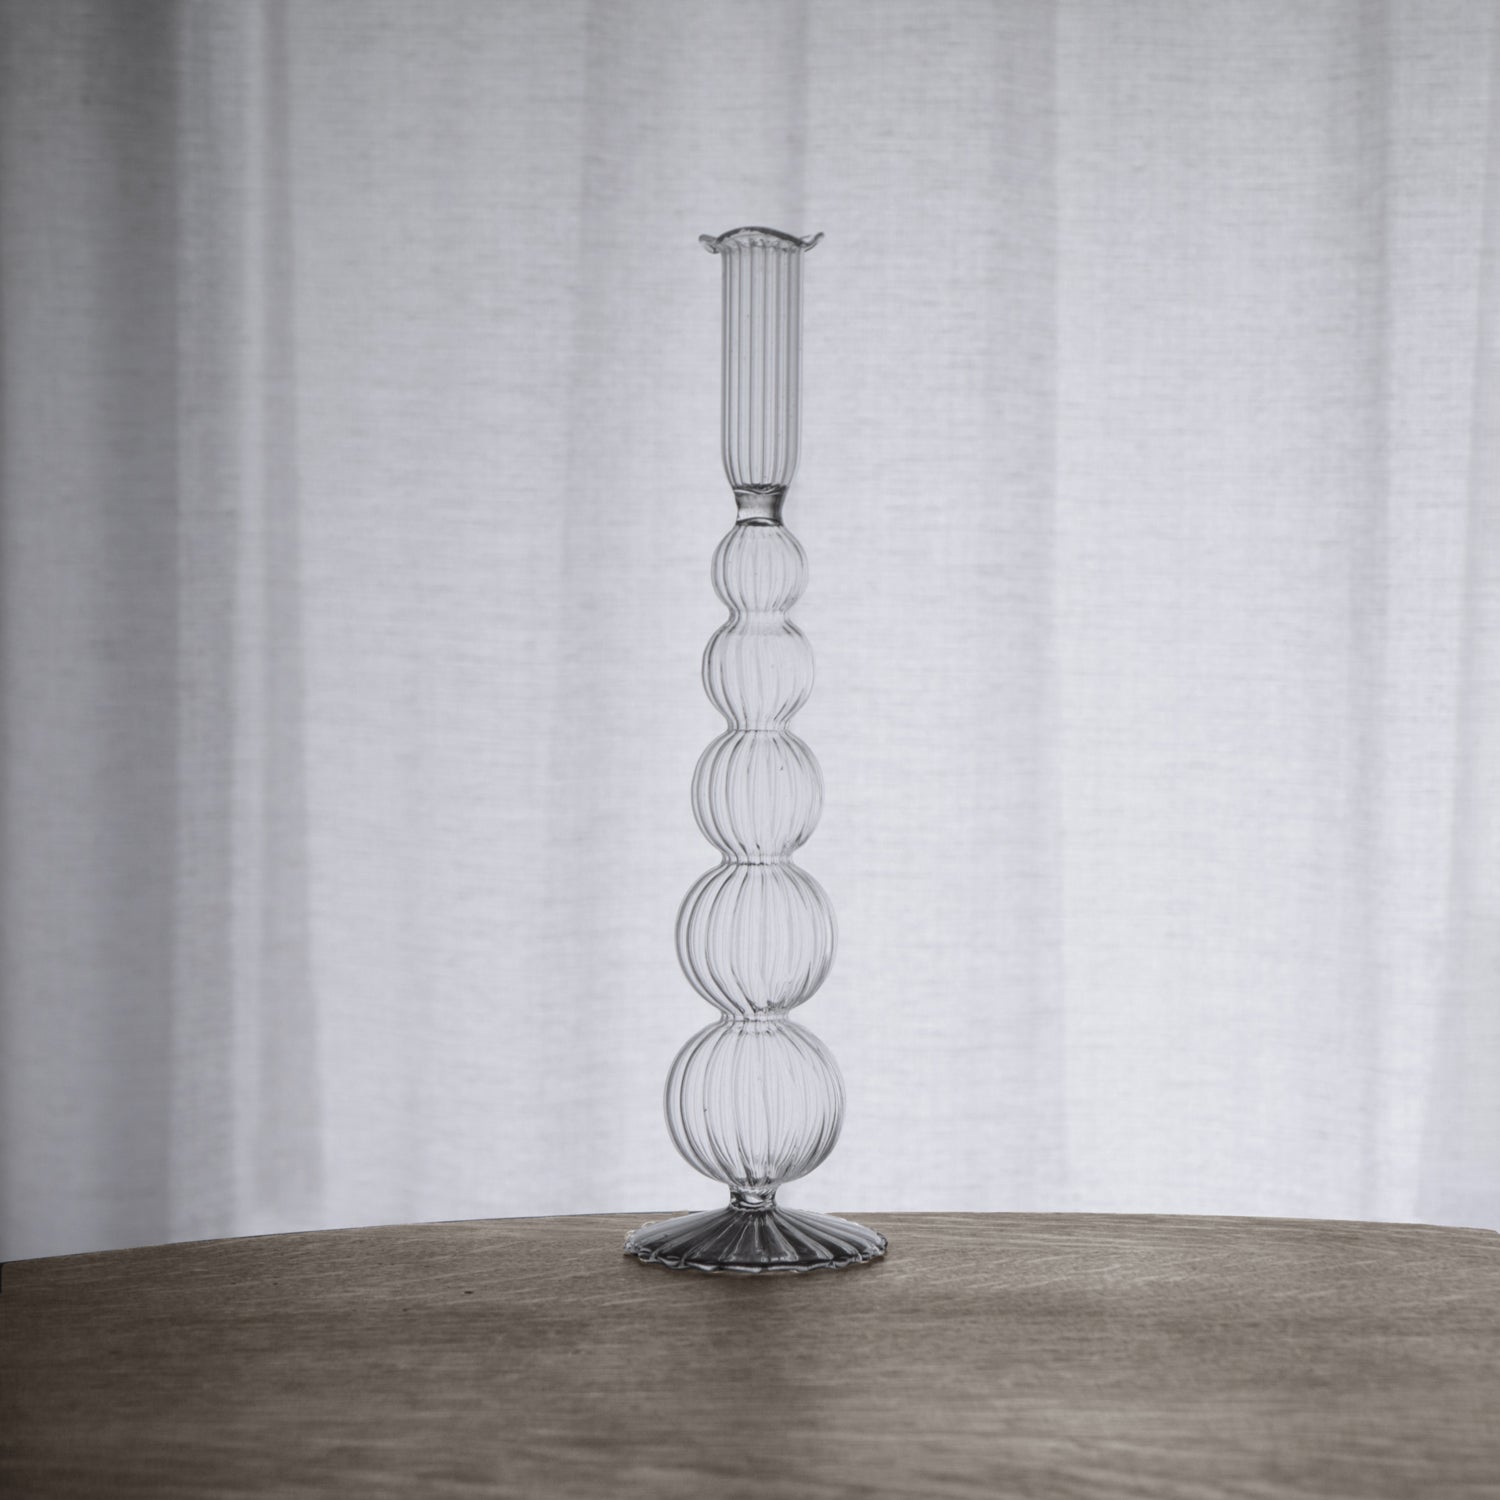 GLASS Cambridge Olivia 12&quot; Candlestick Holder Set of 2 (Clear)